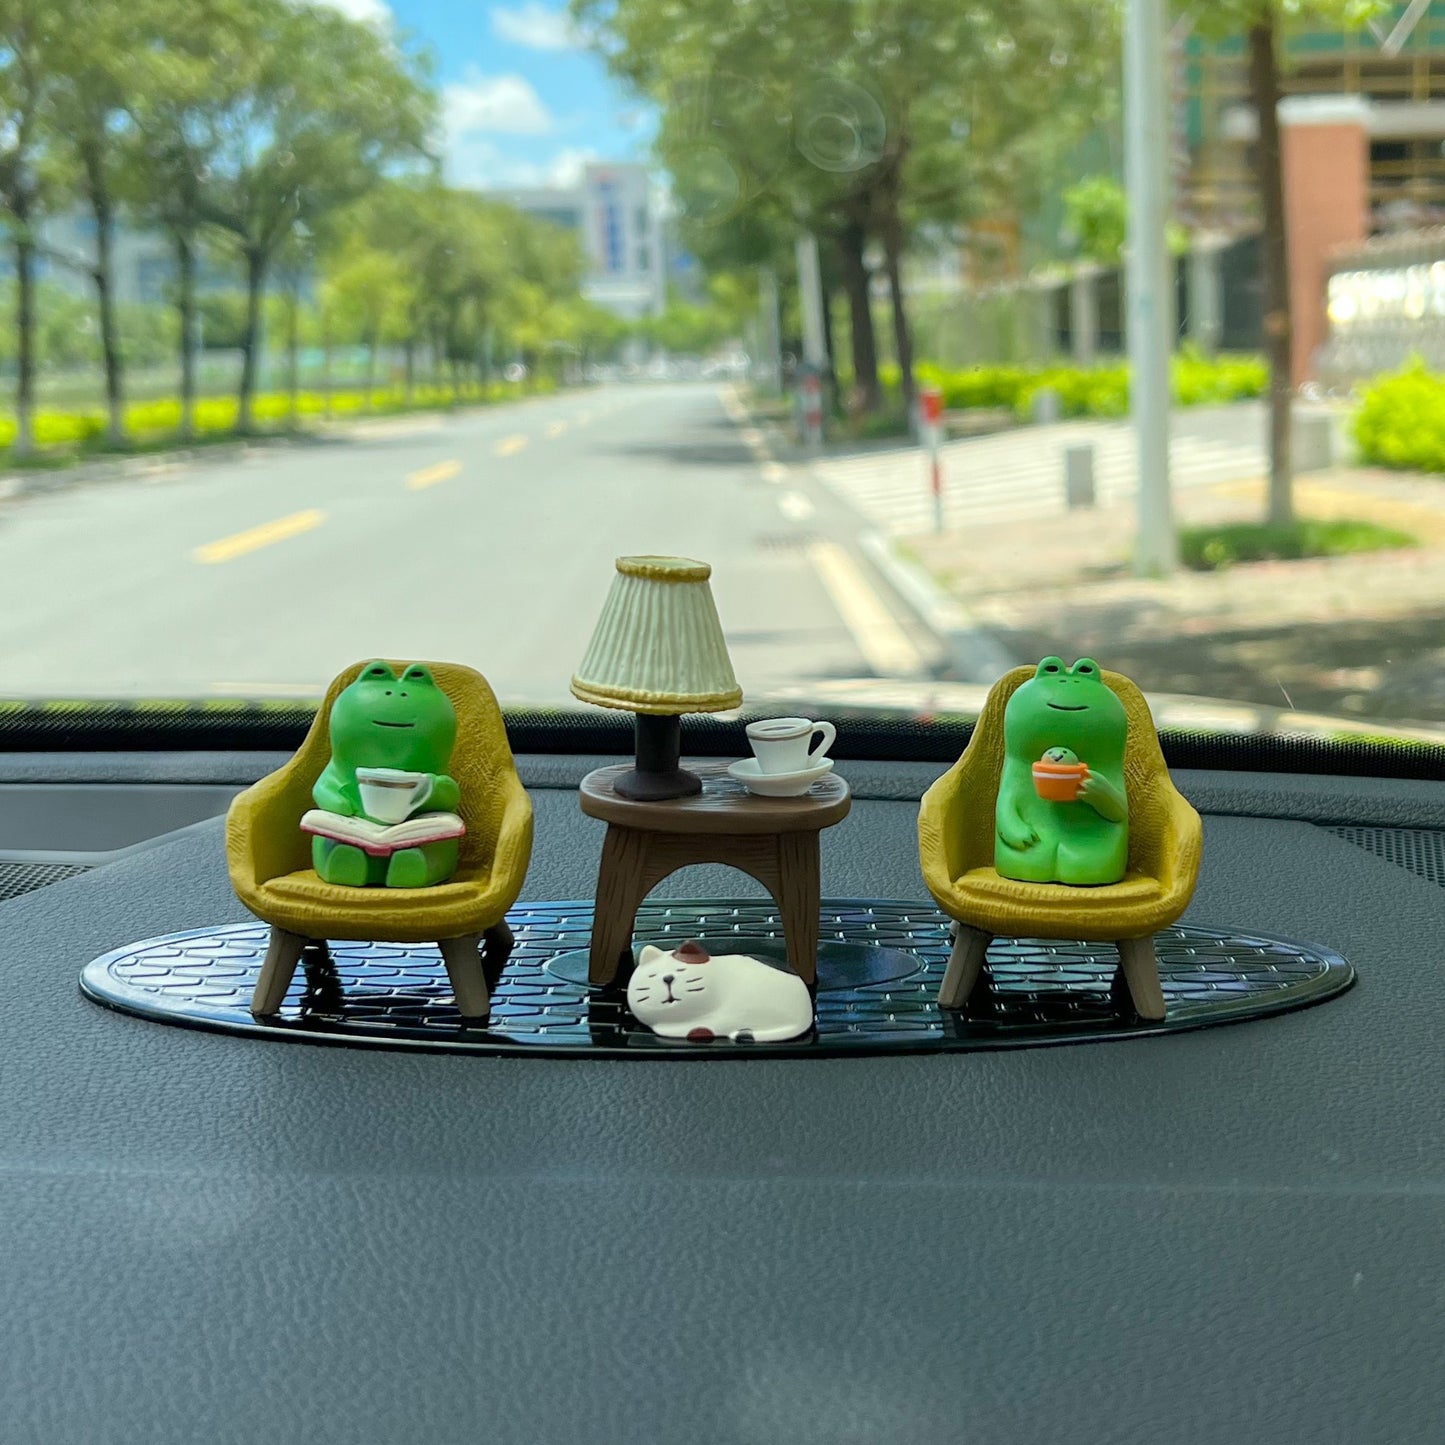 1.18-2.76 Inch Miniature Frog Car Ornament, Cartoon Animal Cat Car Dashboard Decoration, Desk and Office Ornament, Plant Stand - Frog Lover's Decorative Gift